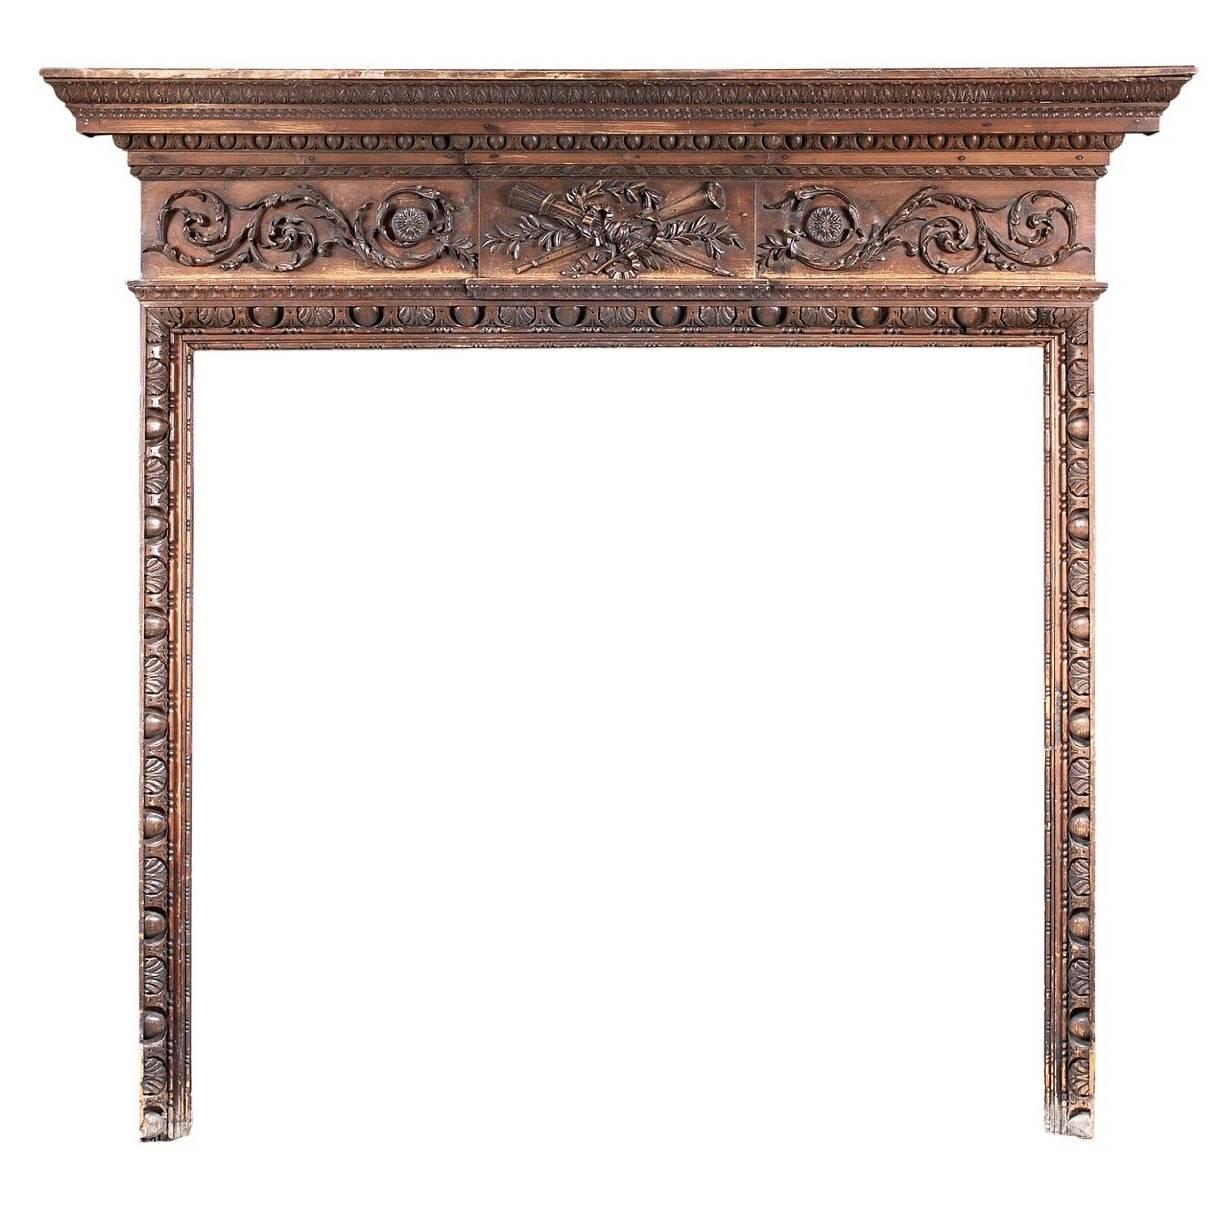 Late 18th Century Carved Pine English Fireplace For Sale